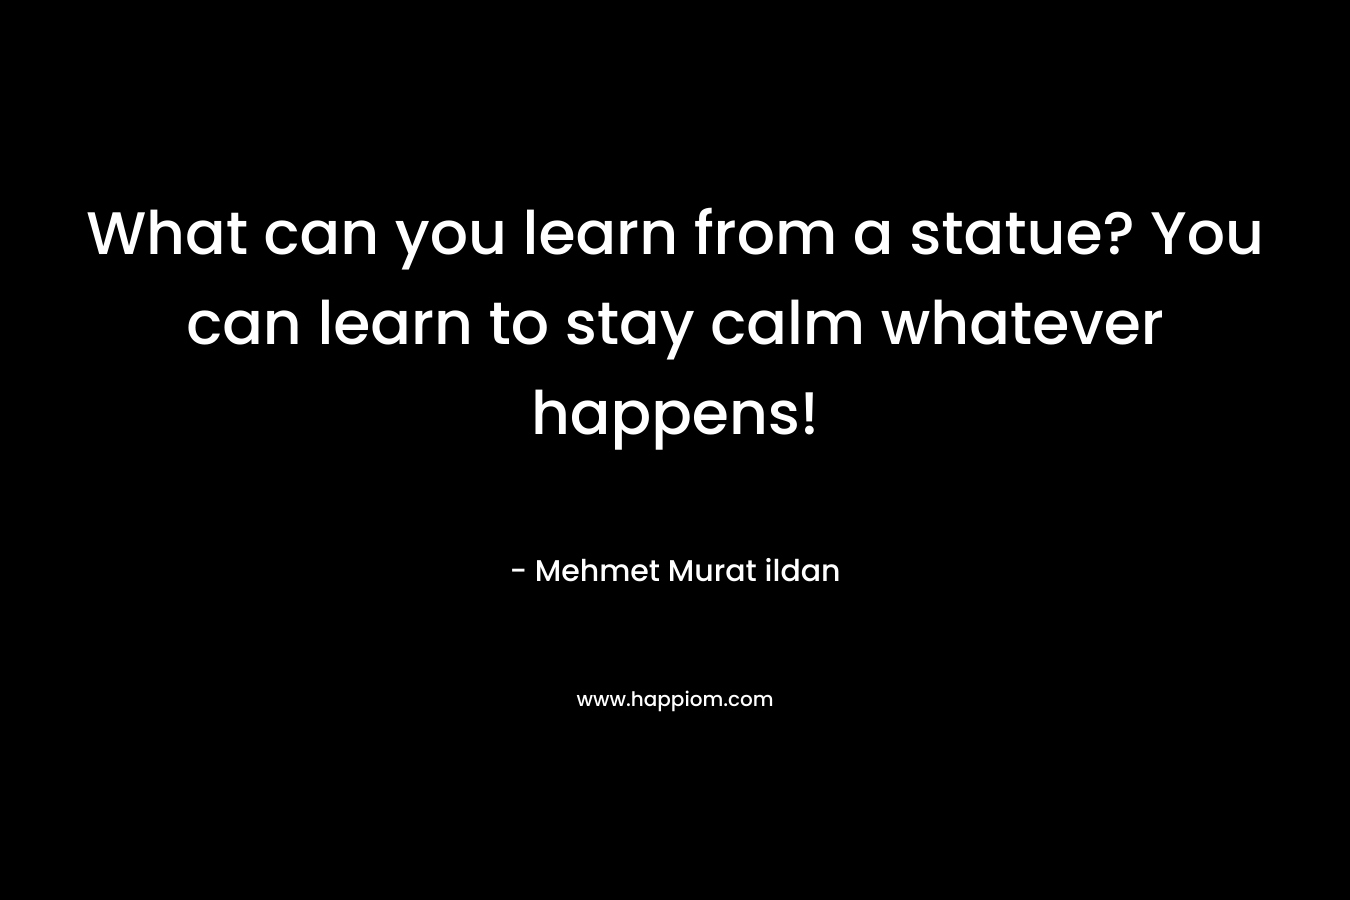 What can you learn from a statue? You can learn to stay calm whatever happens!